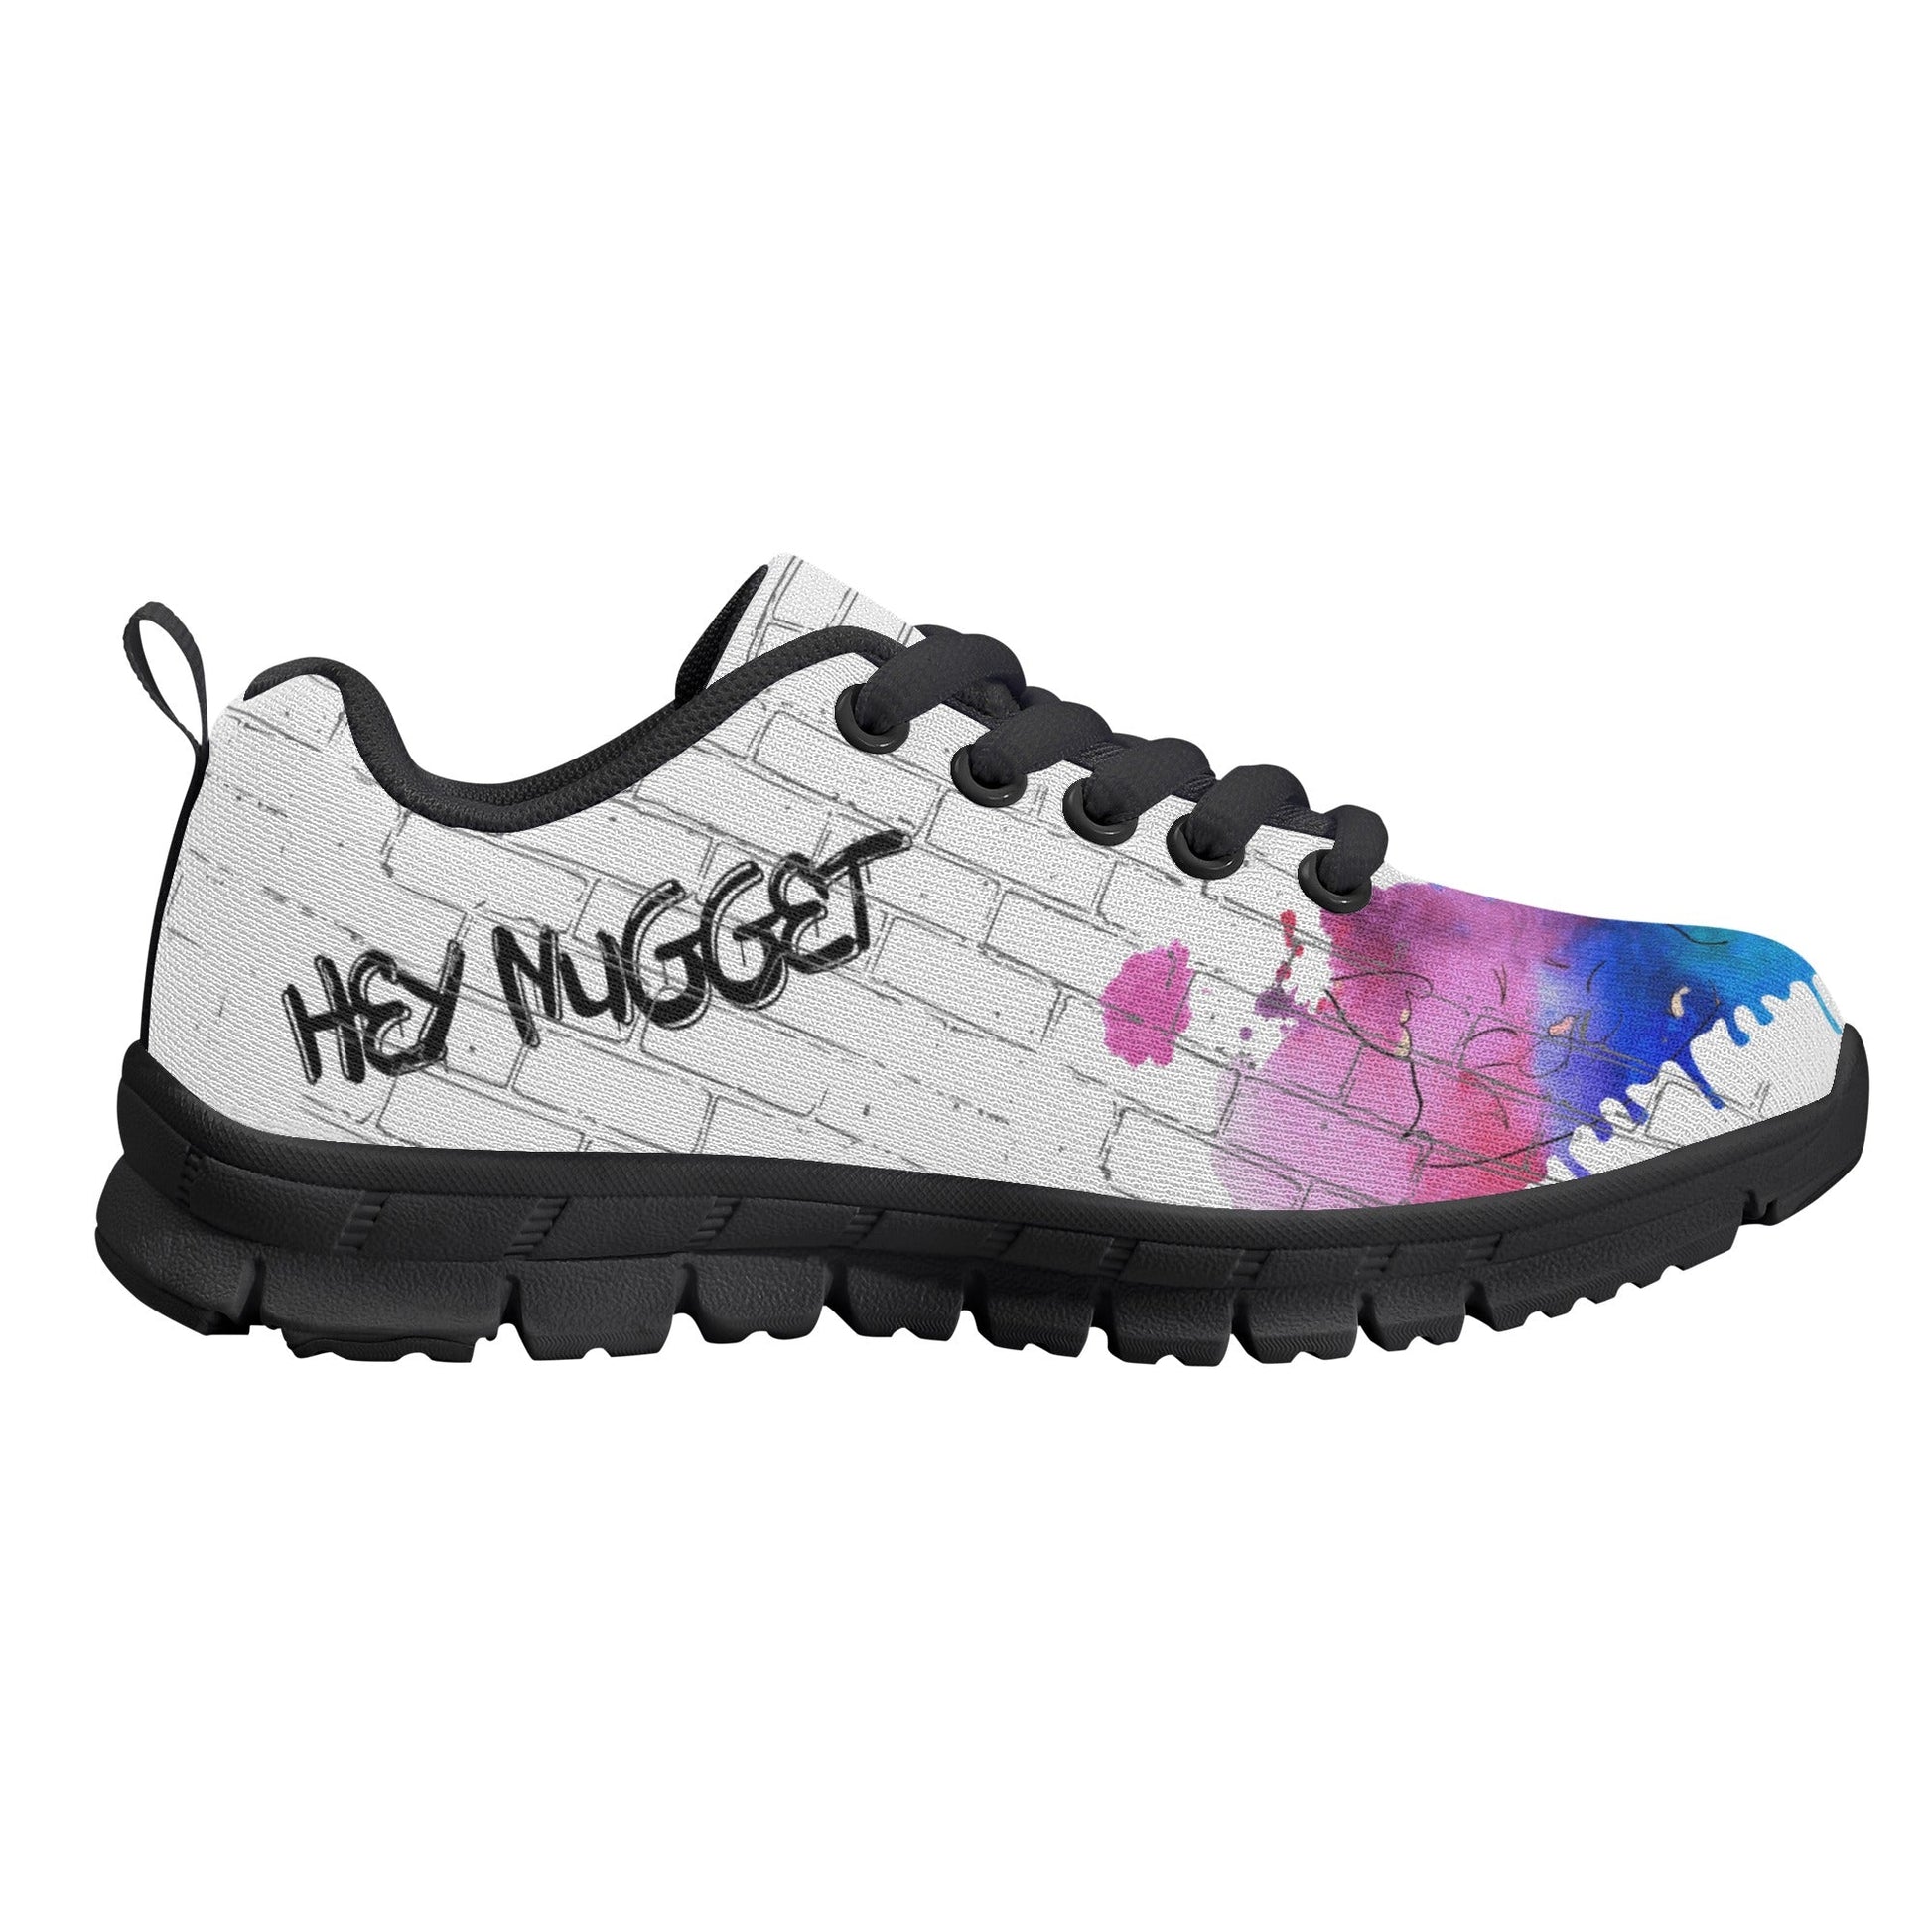 Stand out  with the  Street Style Kids Running Shoes  available at Hey Nugget. Grab yours today!